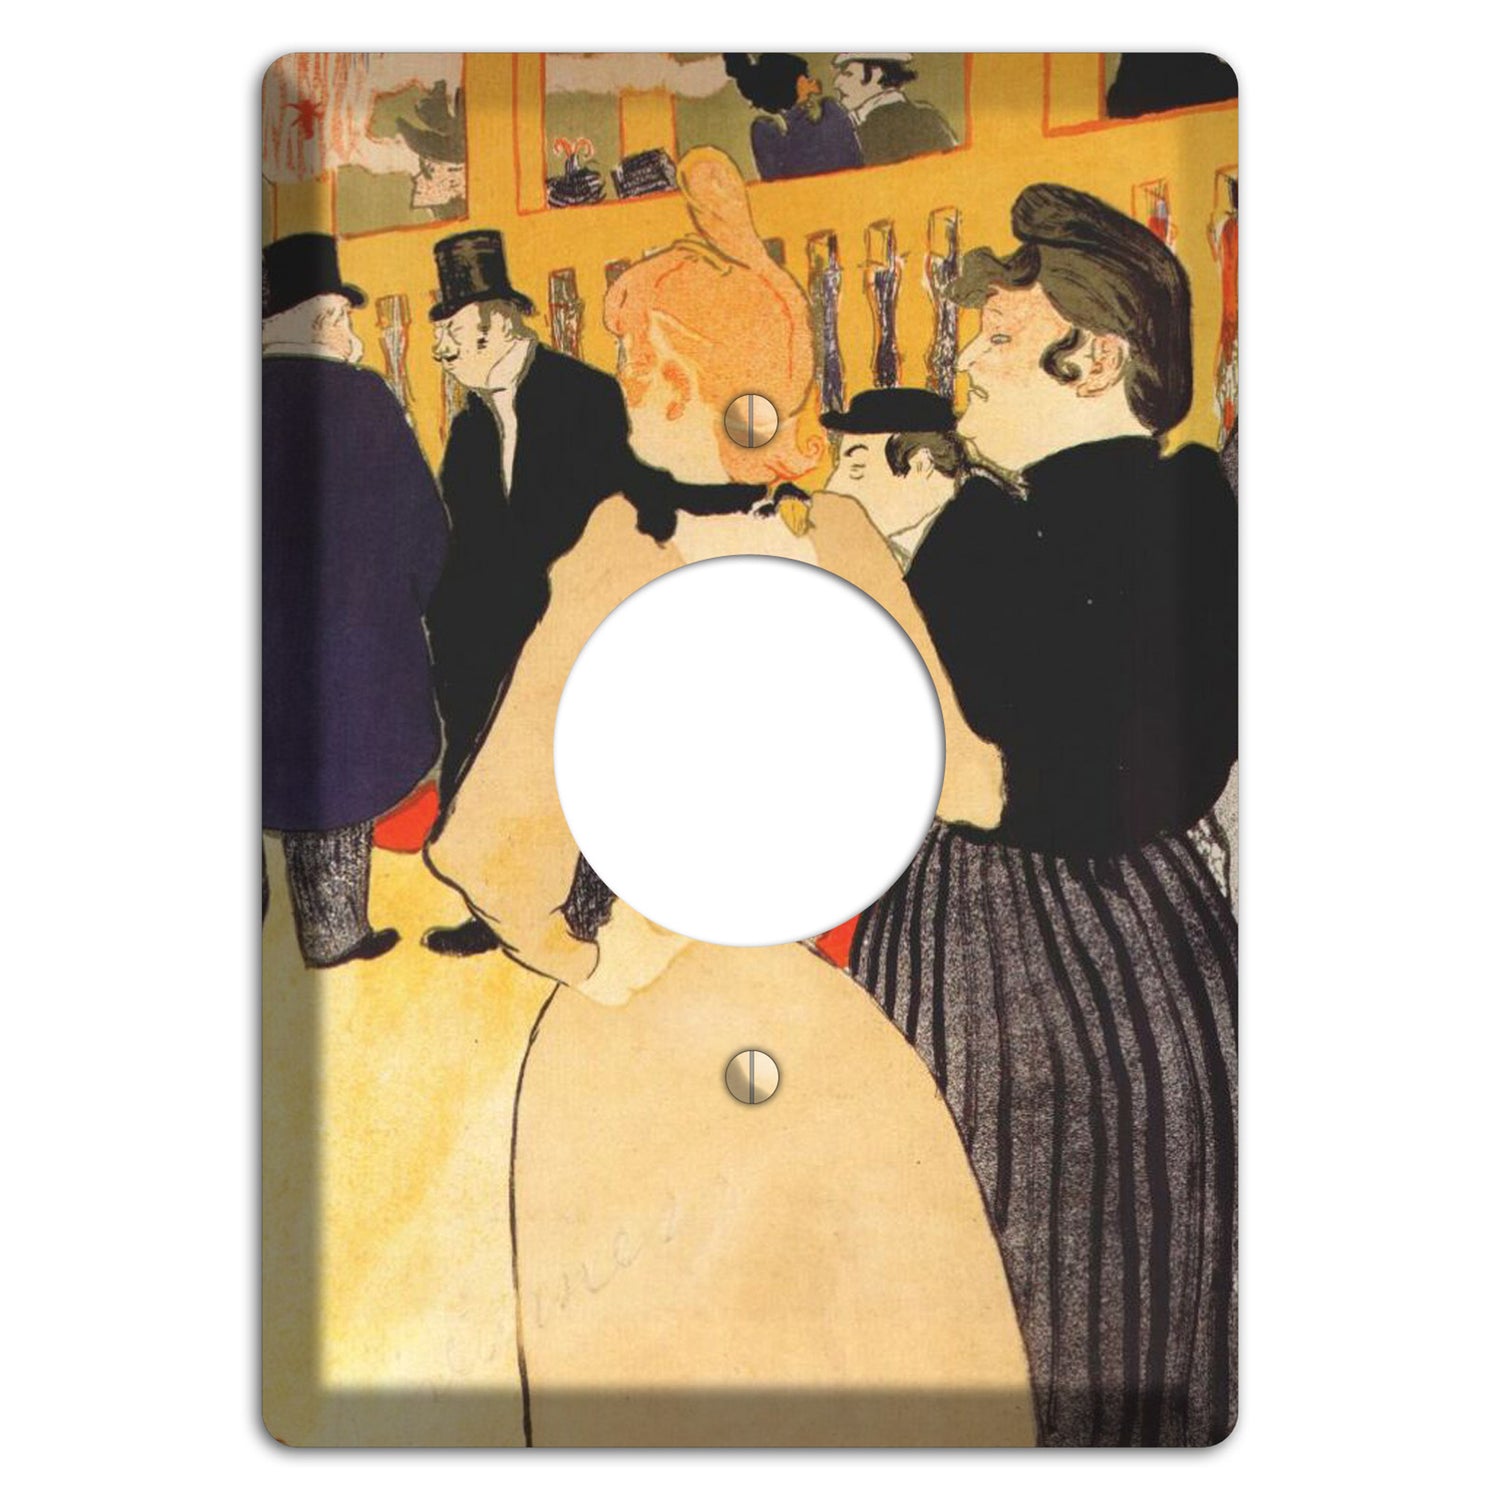 Mome Fromage Vintage Poster Single Receptacle Wallplate